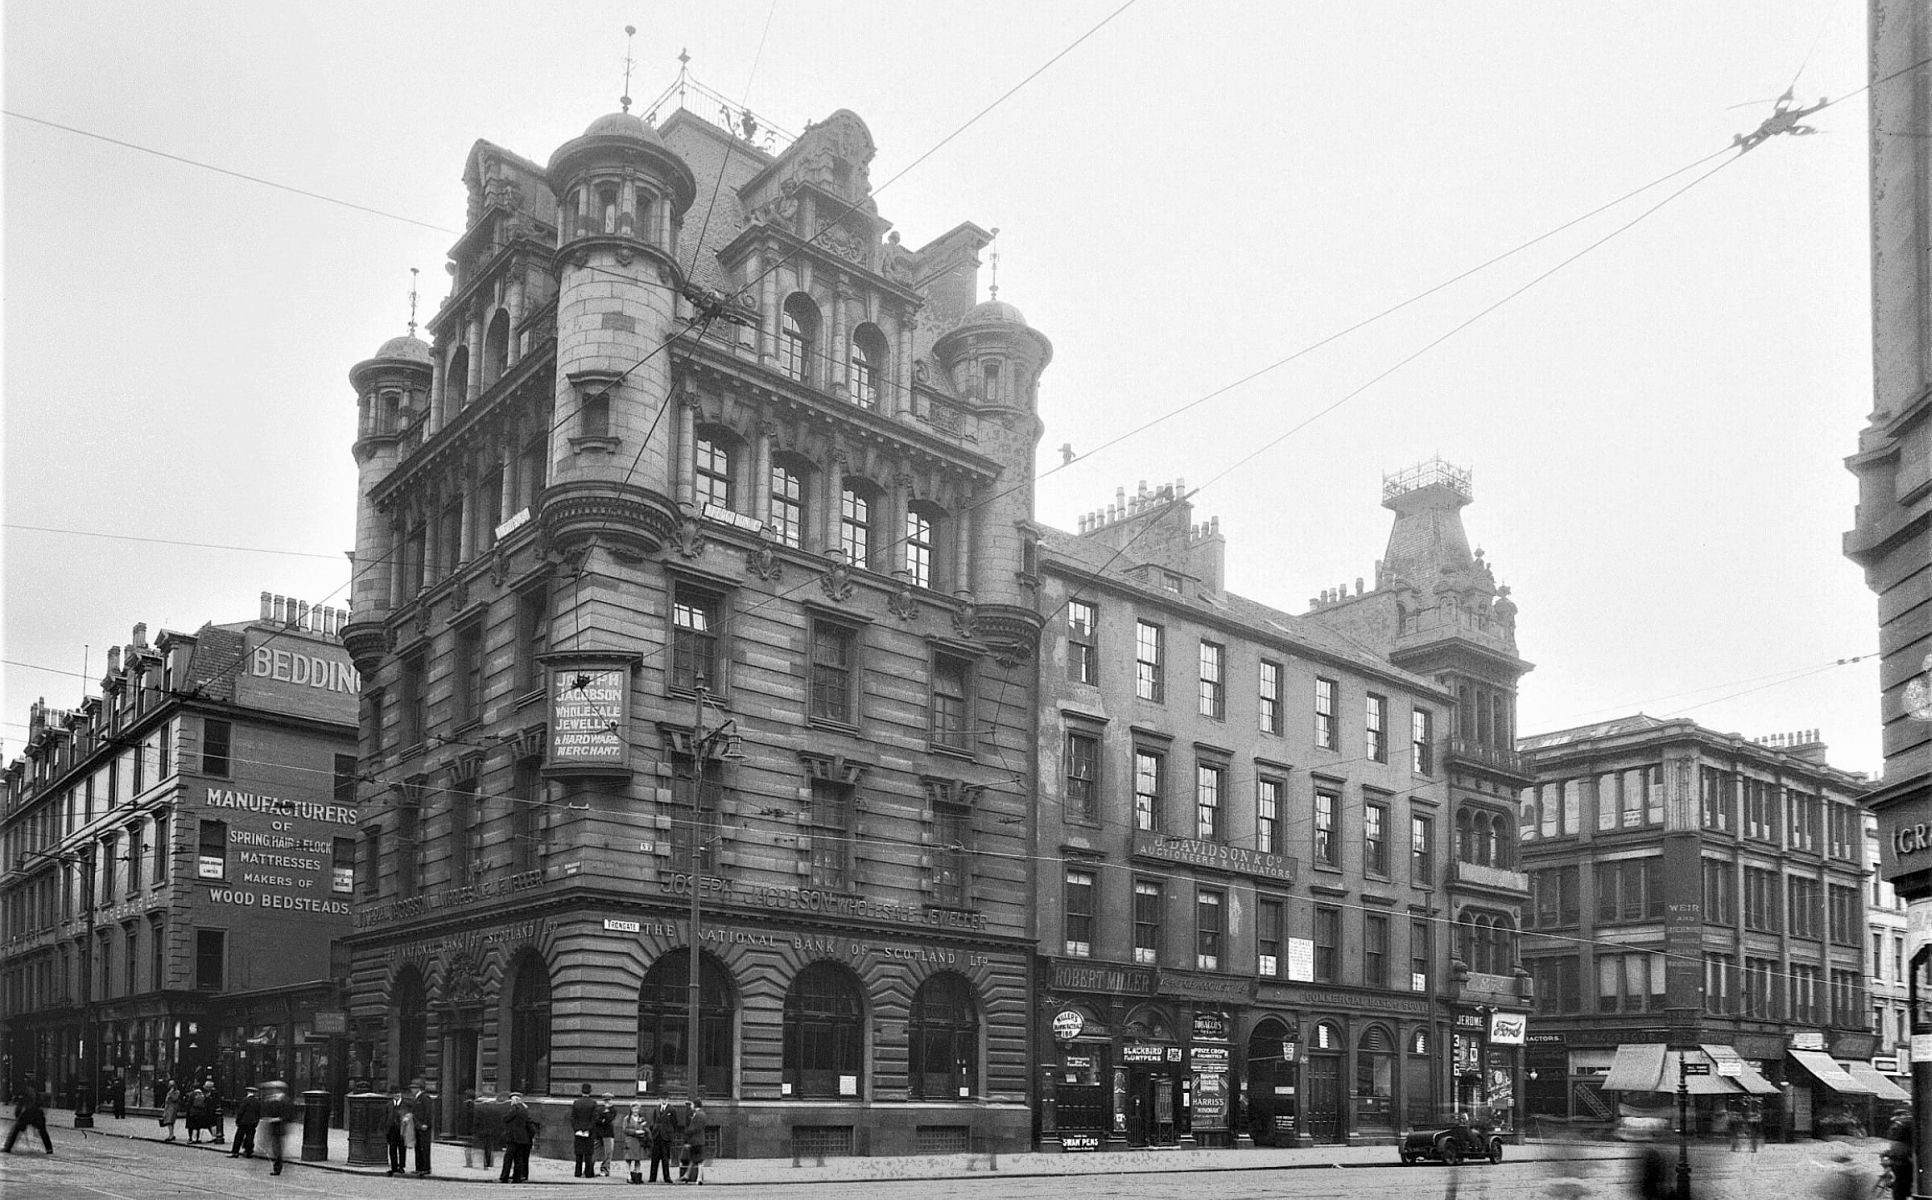 former National Bank of Scotland building in Glasgow city centre